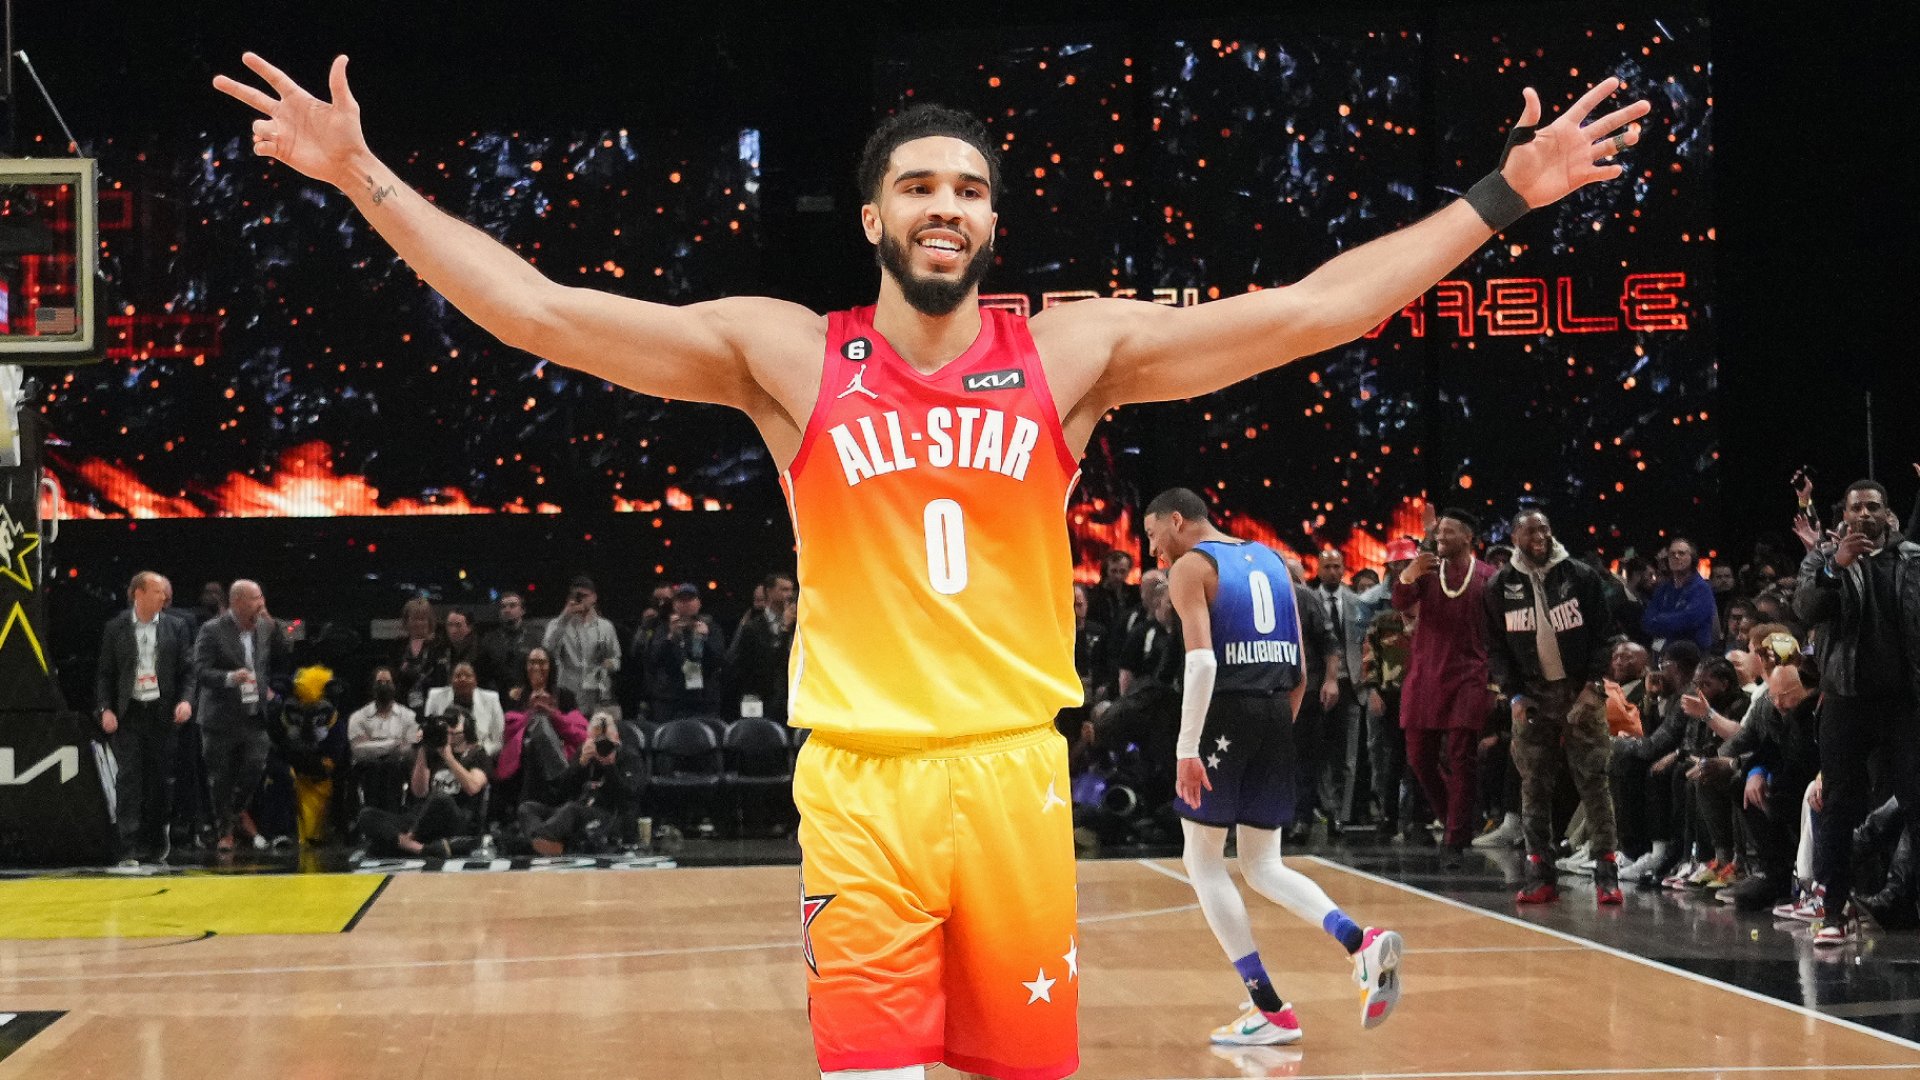 NBA All Star Game 2023 Results, Highlights: Jayson Tatum's Record 55 Points Leads Team Giannis Over Team LeBron. Sporting News Singapore